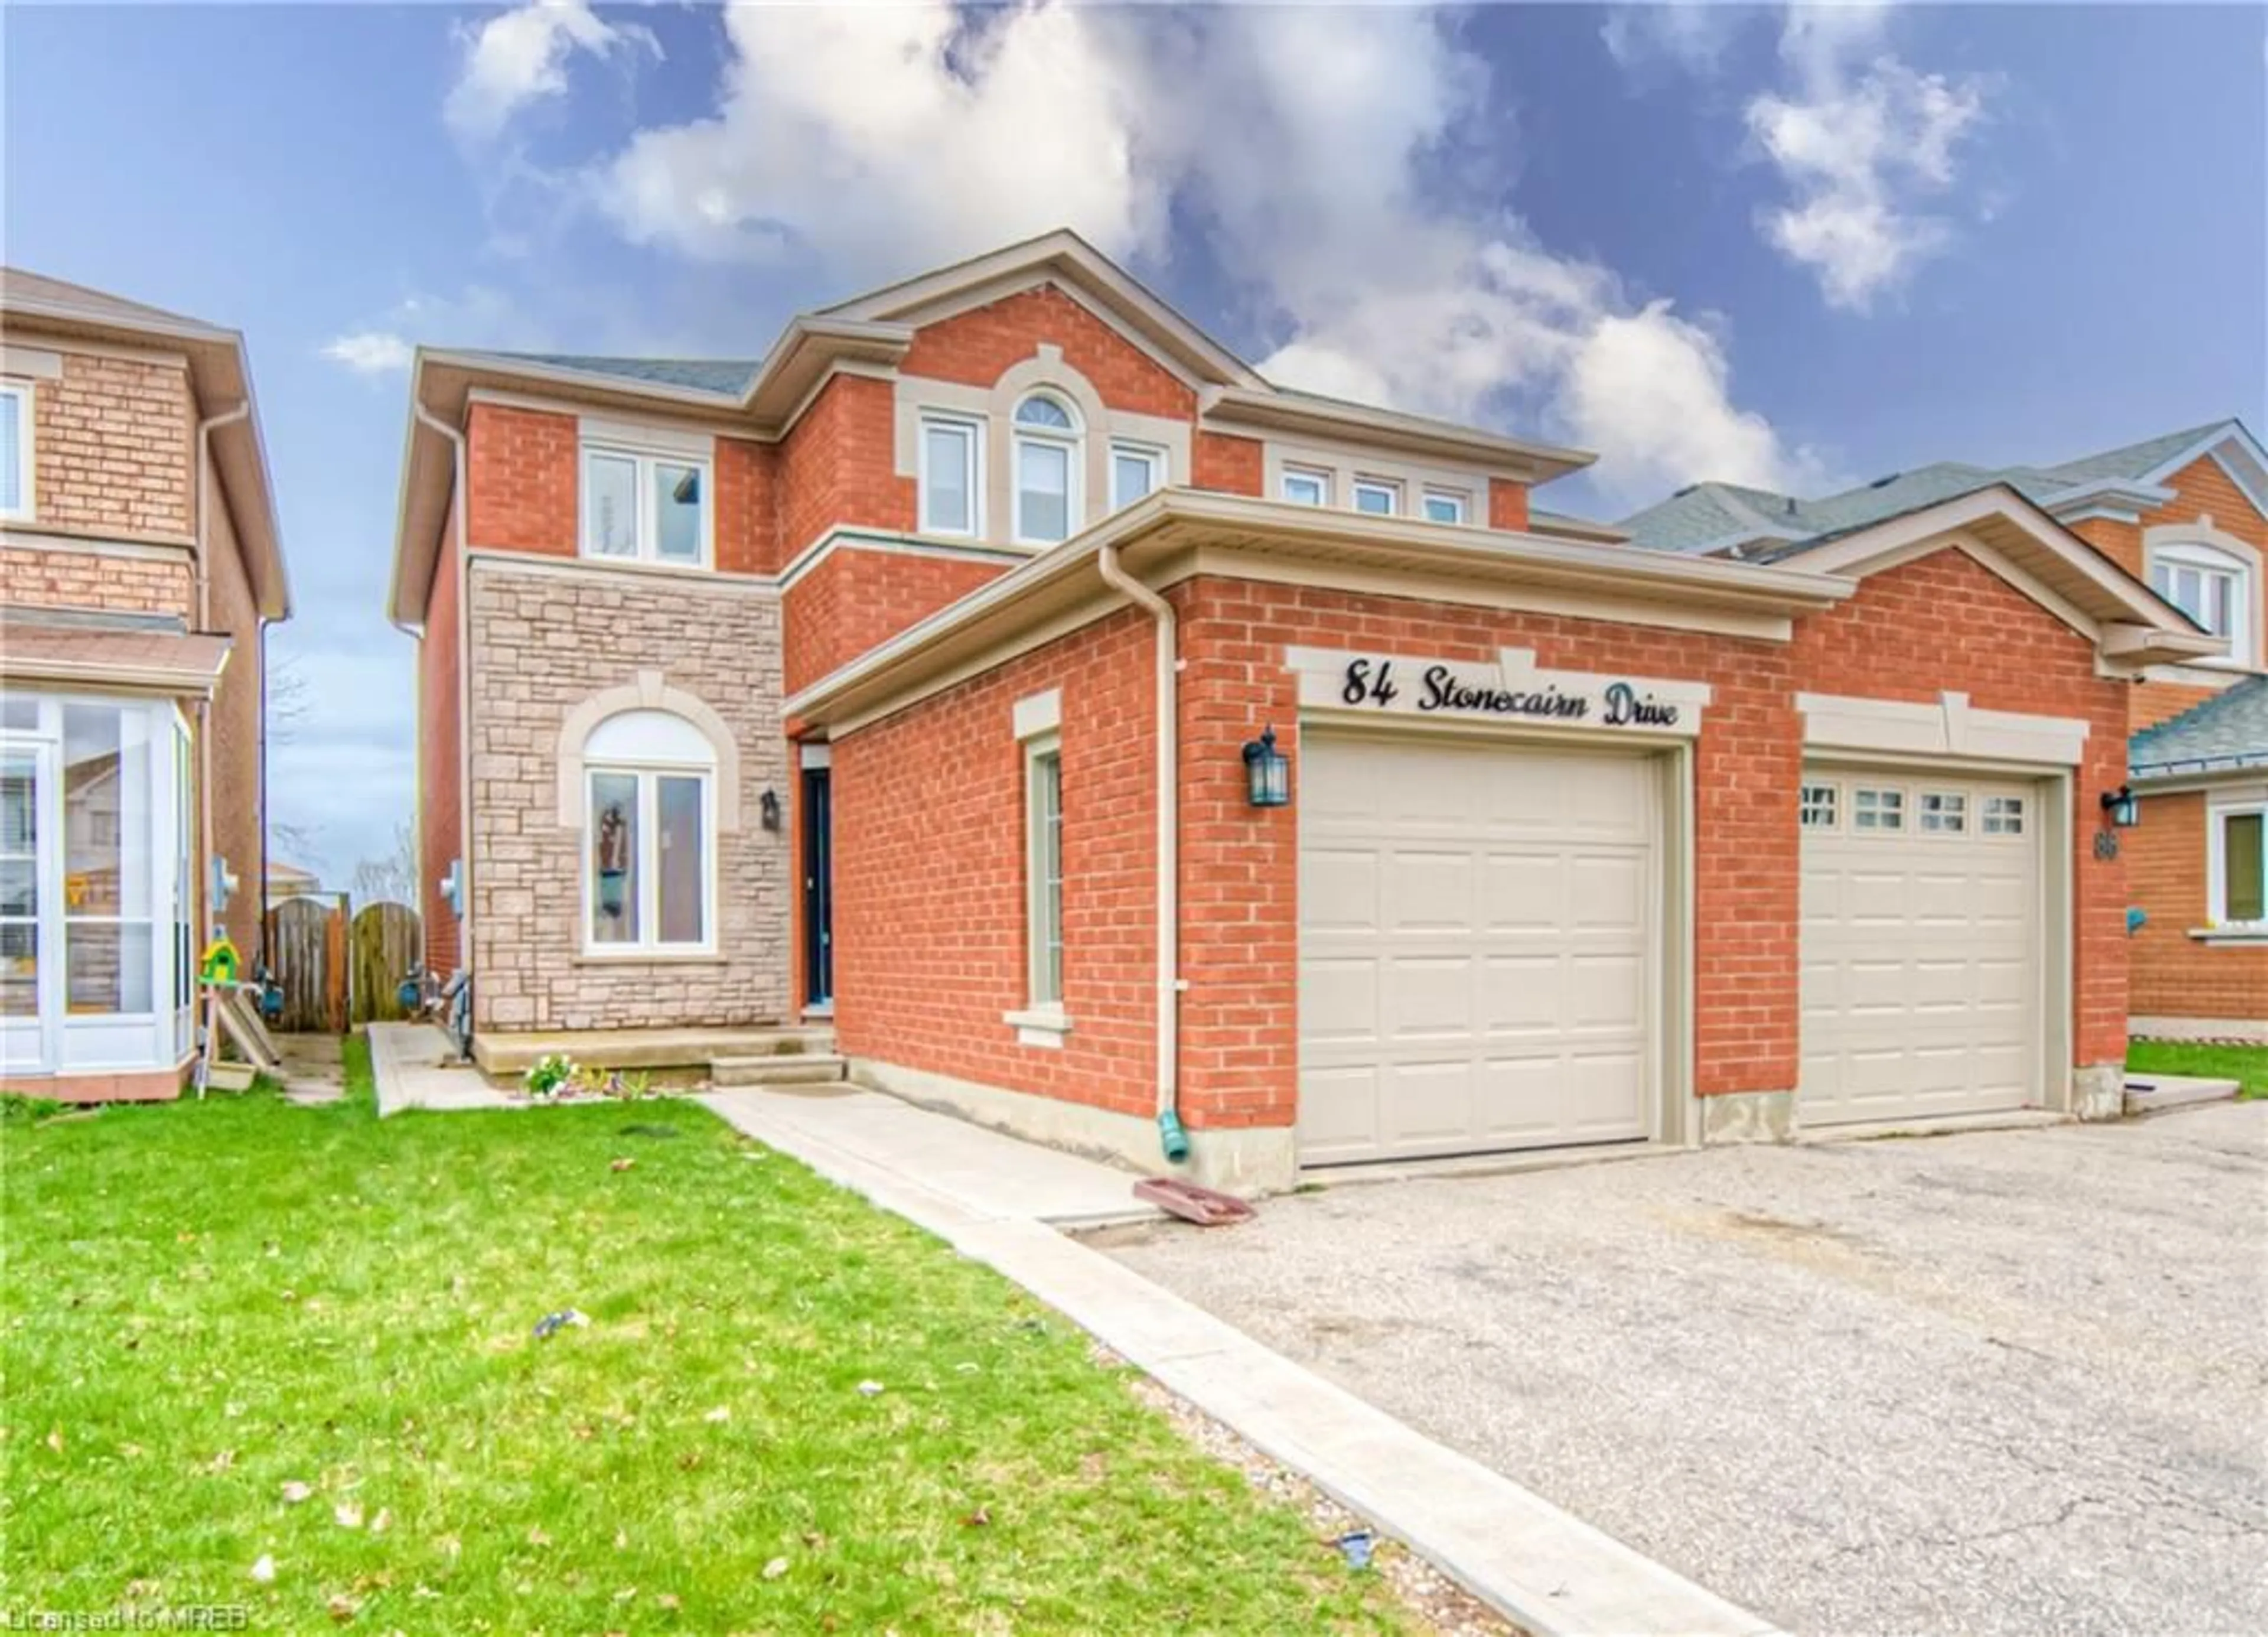 Home with brick exterior material for 84 Stonecairn Dr, Cambridge Ontario N1T 1W3